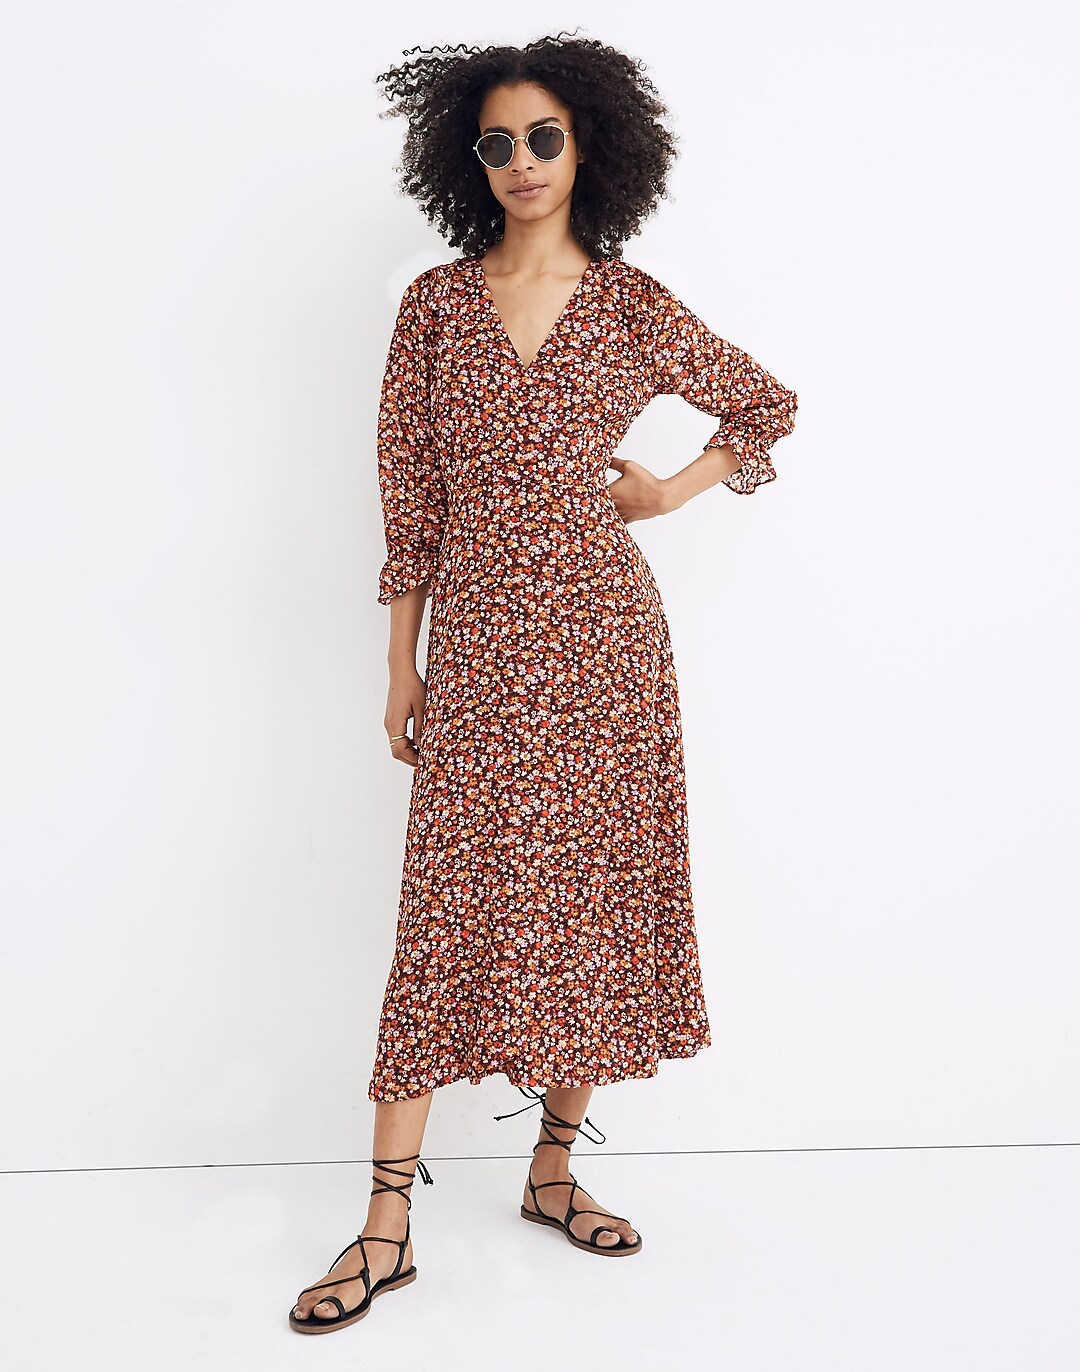 Style and Cappuccino : After Dusk: Madewell Mercado Shift Dress